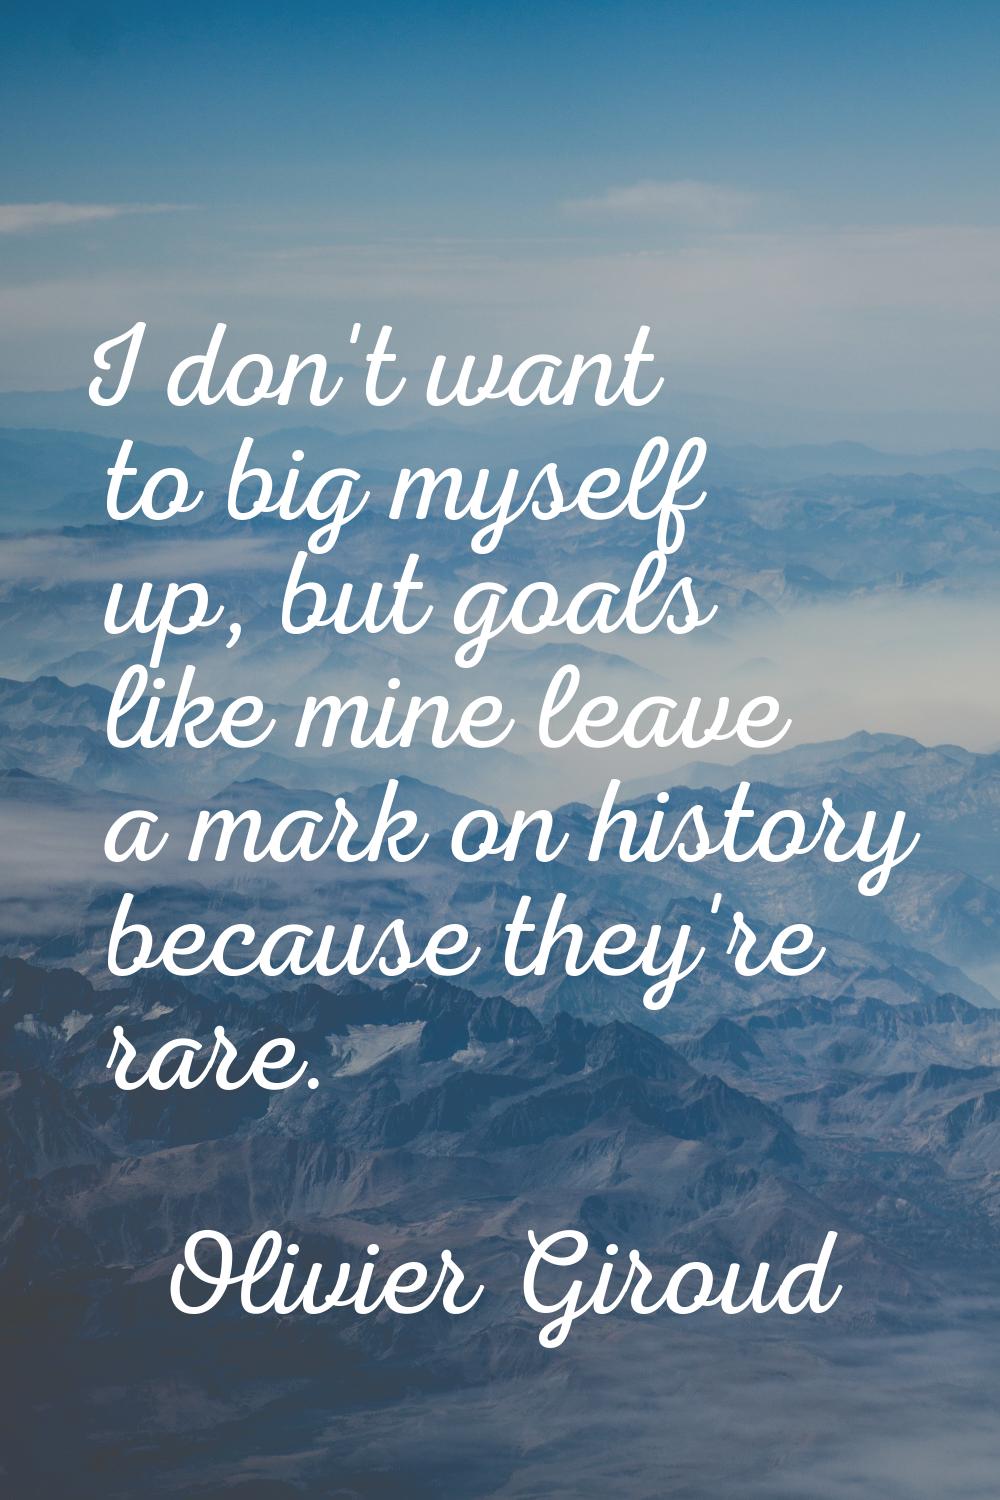 I don't want to big myself up, but goals like mine leave a mark on history because they're rare.